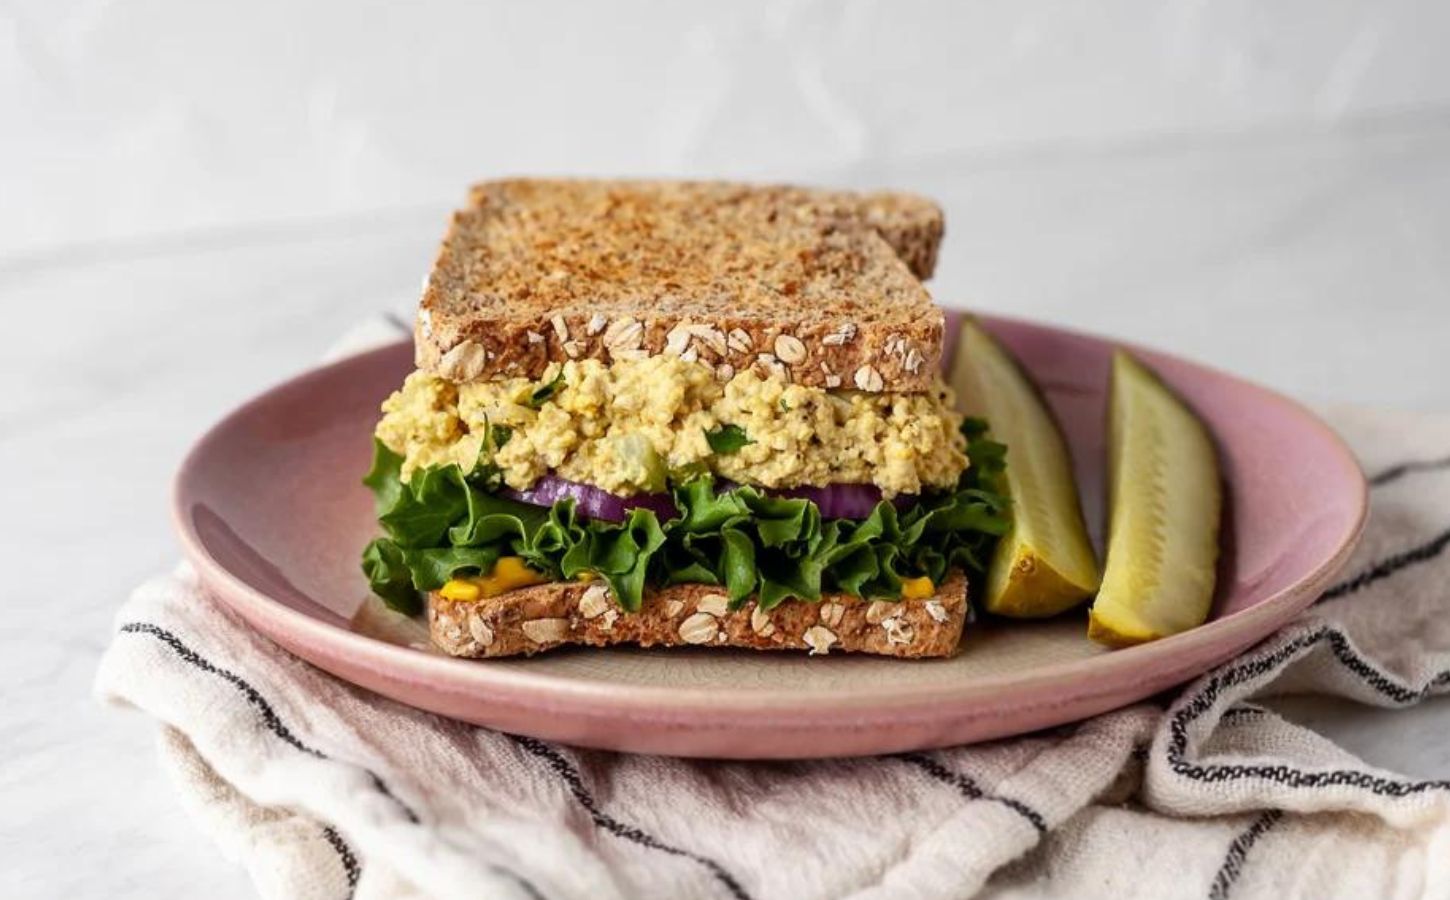 A vegan egg salad sandwich made to a plant-based and egg-free recipe